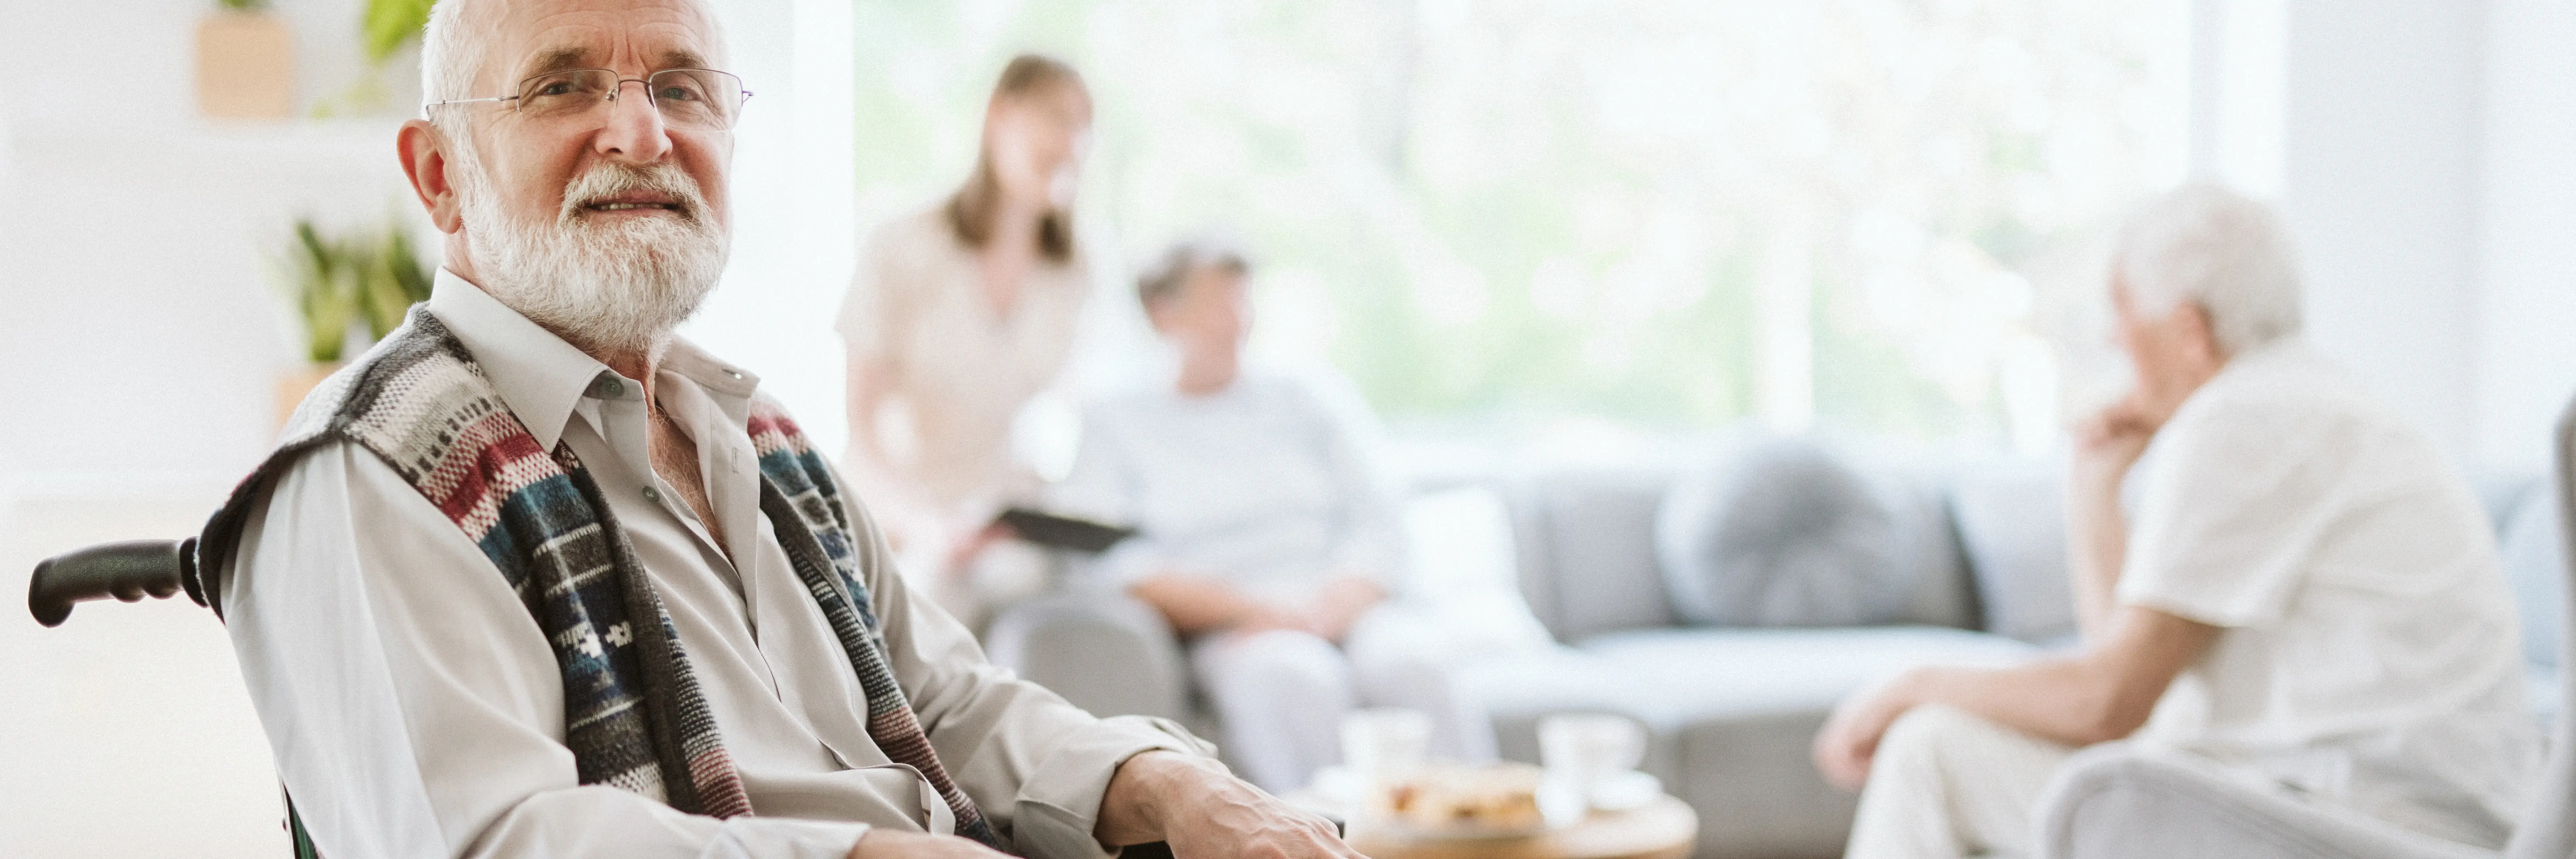 Memory Care vs. Nursing Home: Know The Differences